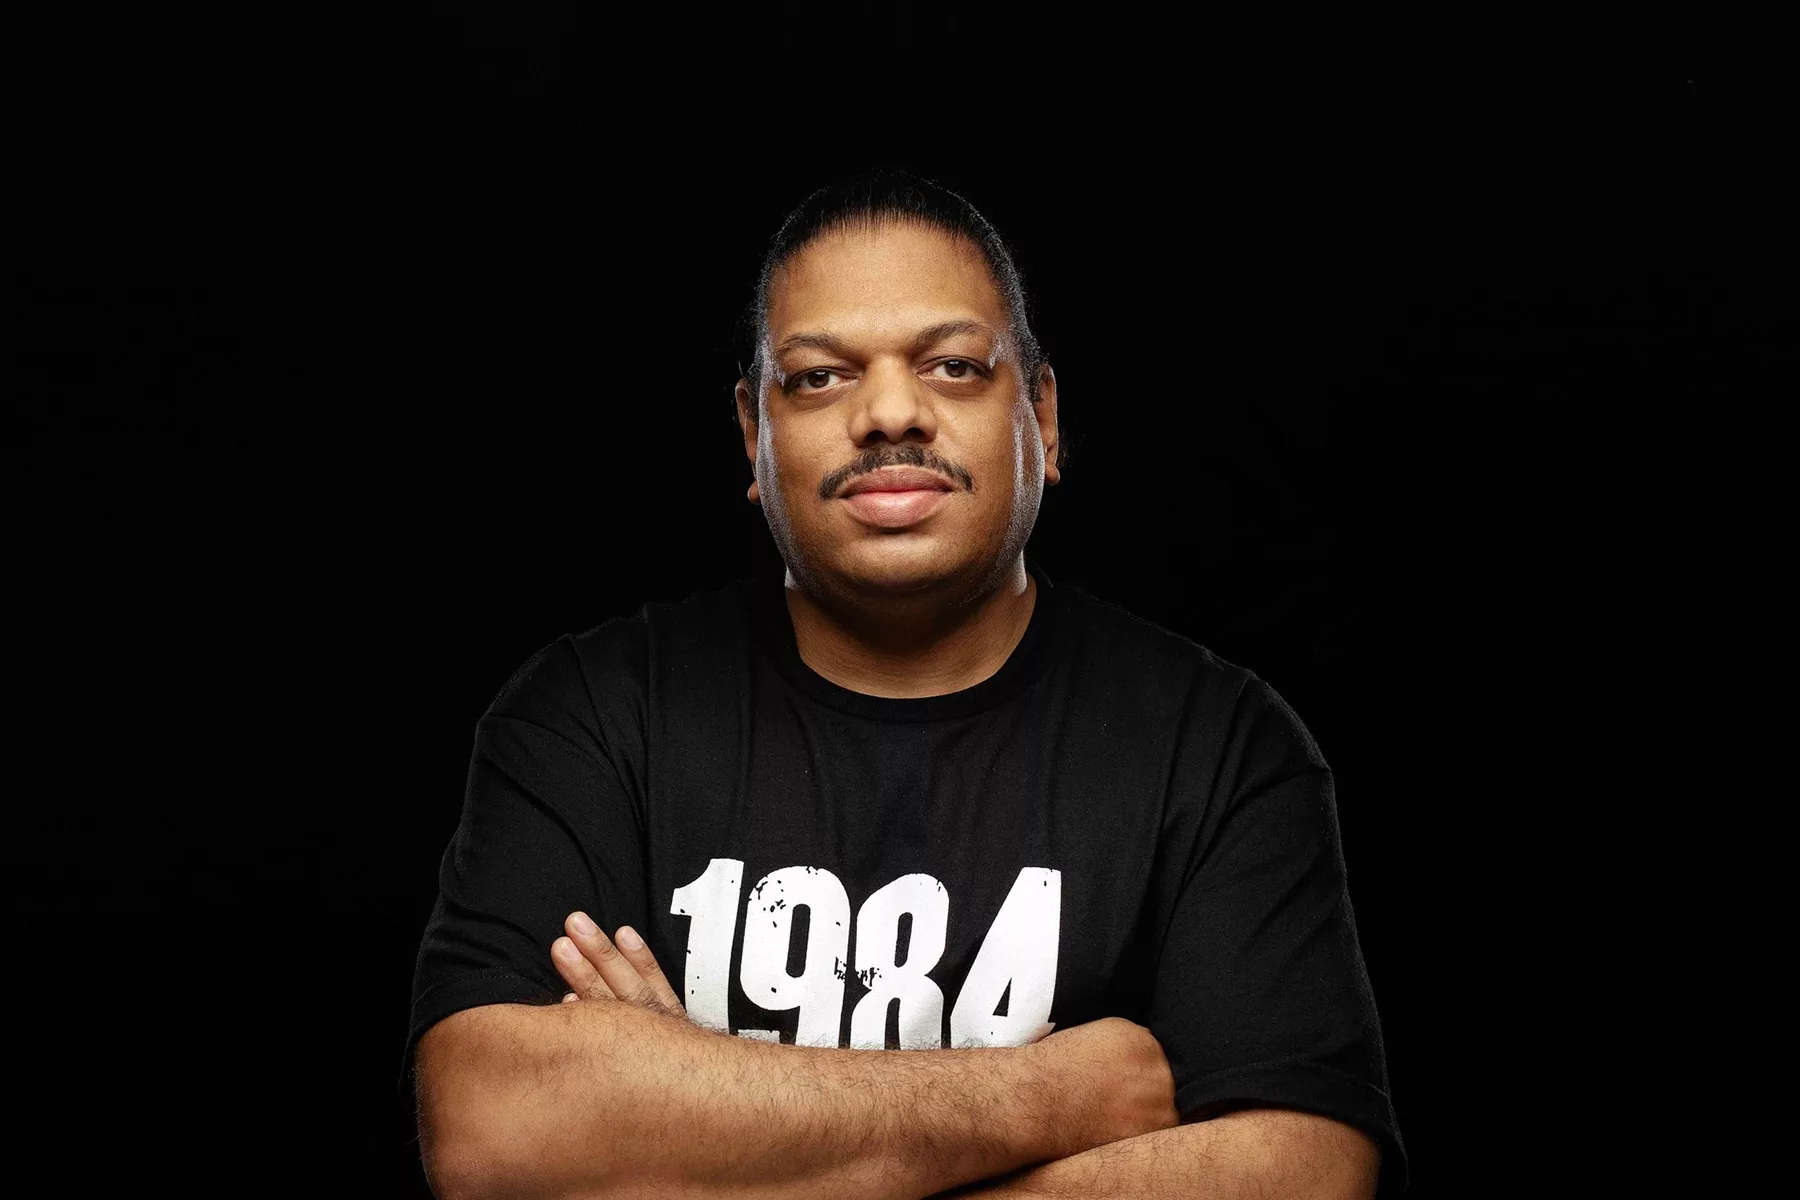 Kerri Chandler honors his late father with ‘Dad Giveaway’ collection